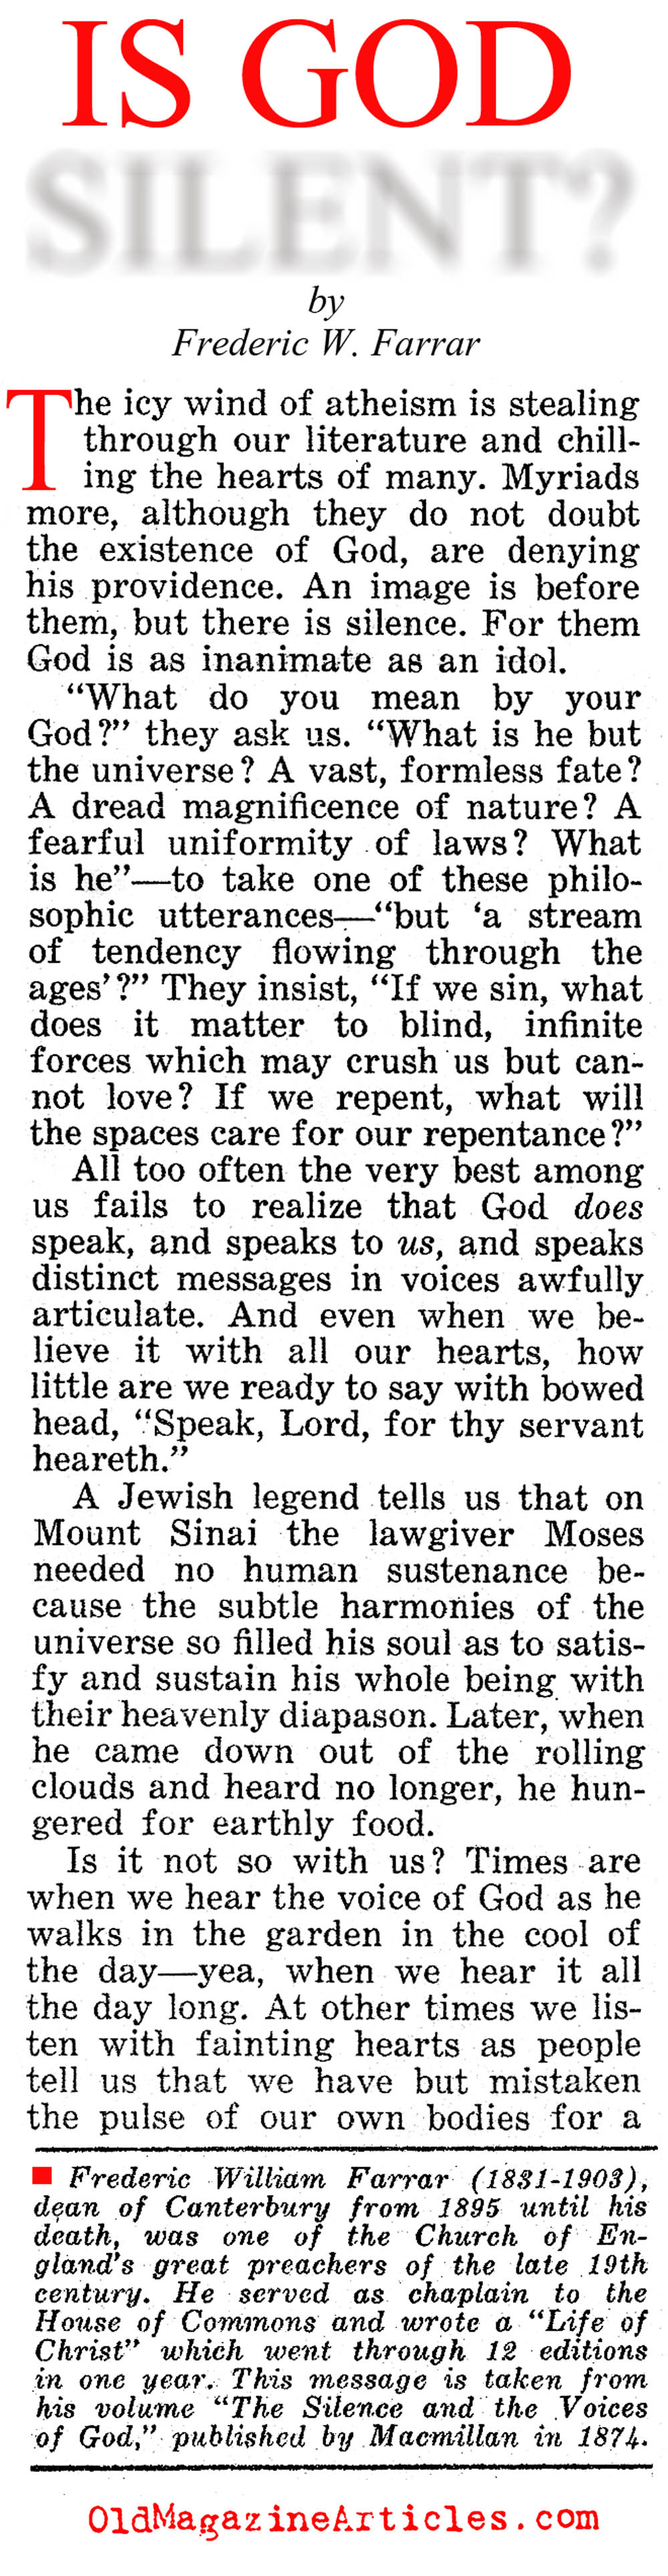 Why Is God So Silent? (Jesus People, 1973)